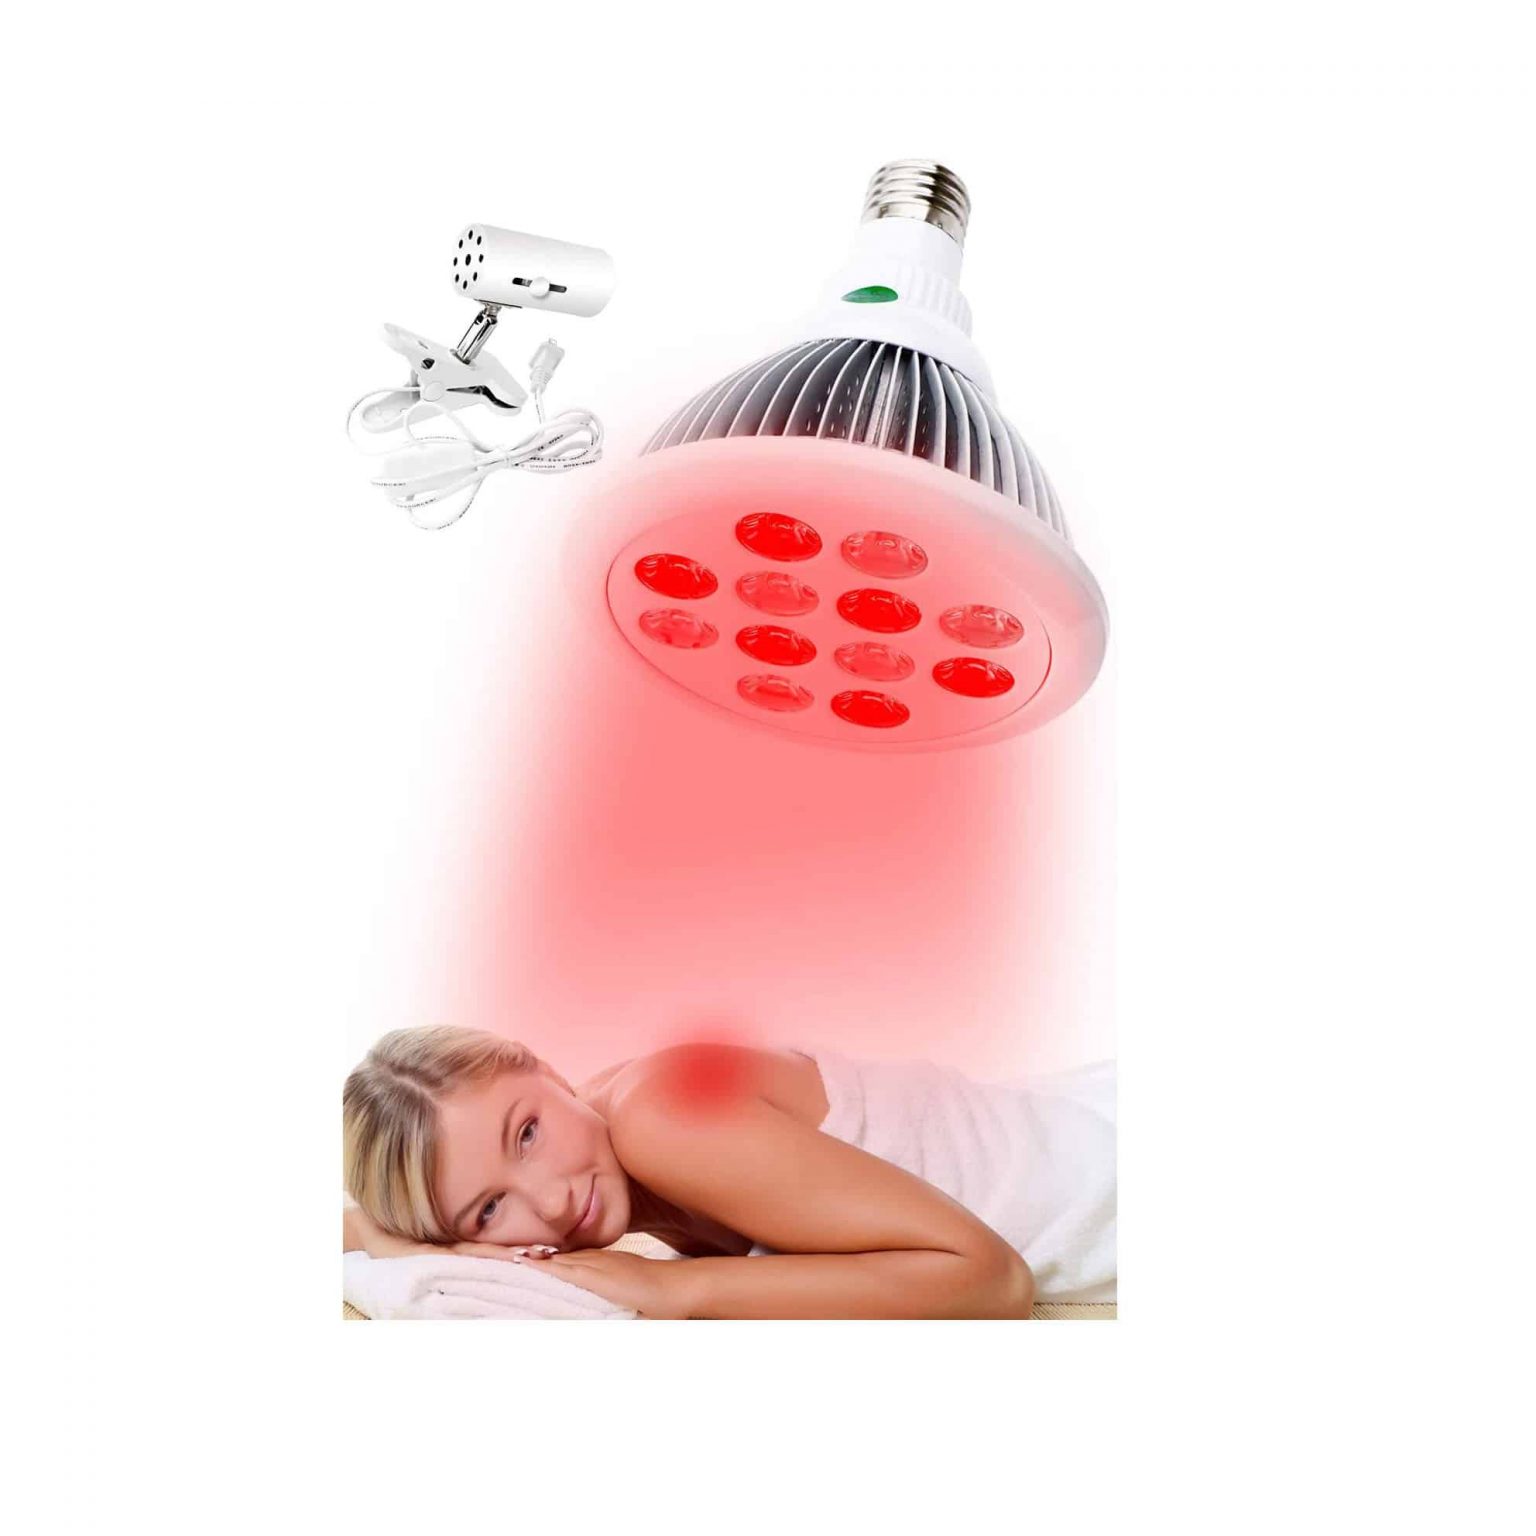 Top 10 Best Red Light Therapy Lamps in 2020 Reviews Last Update